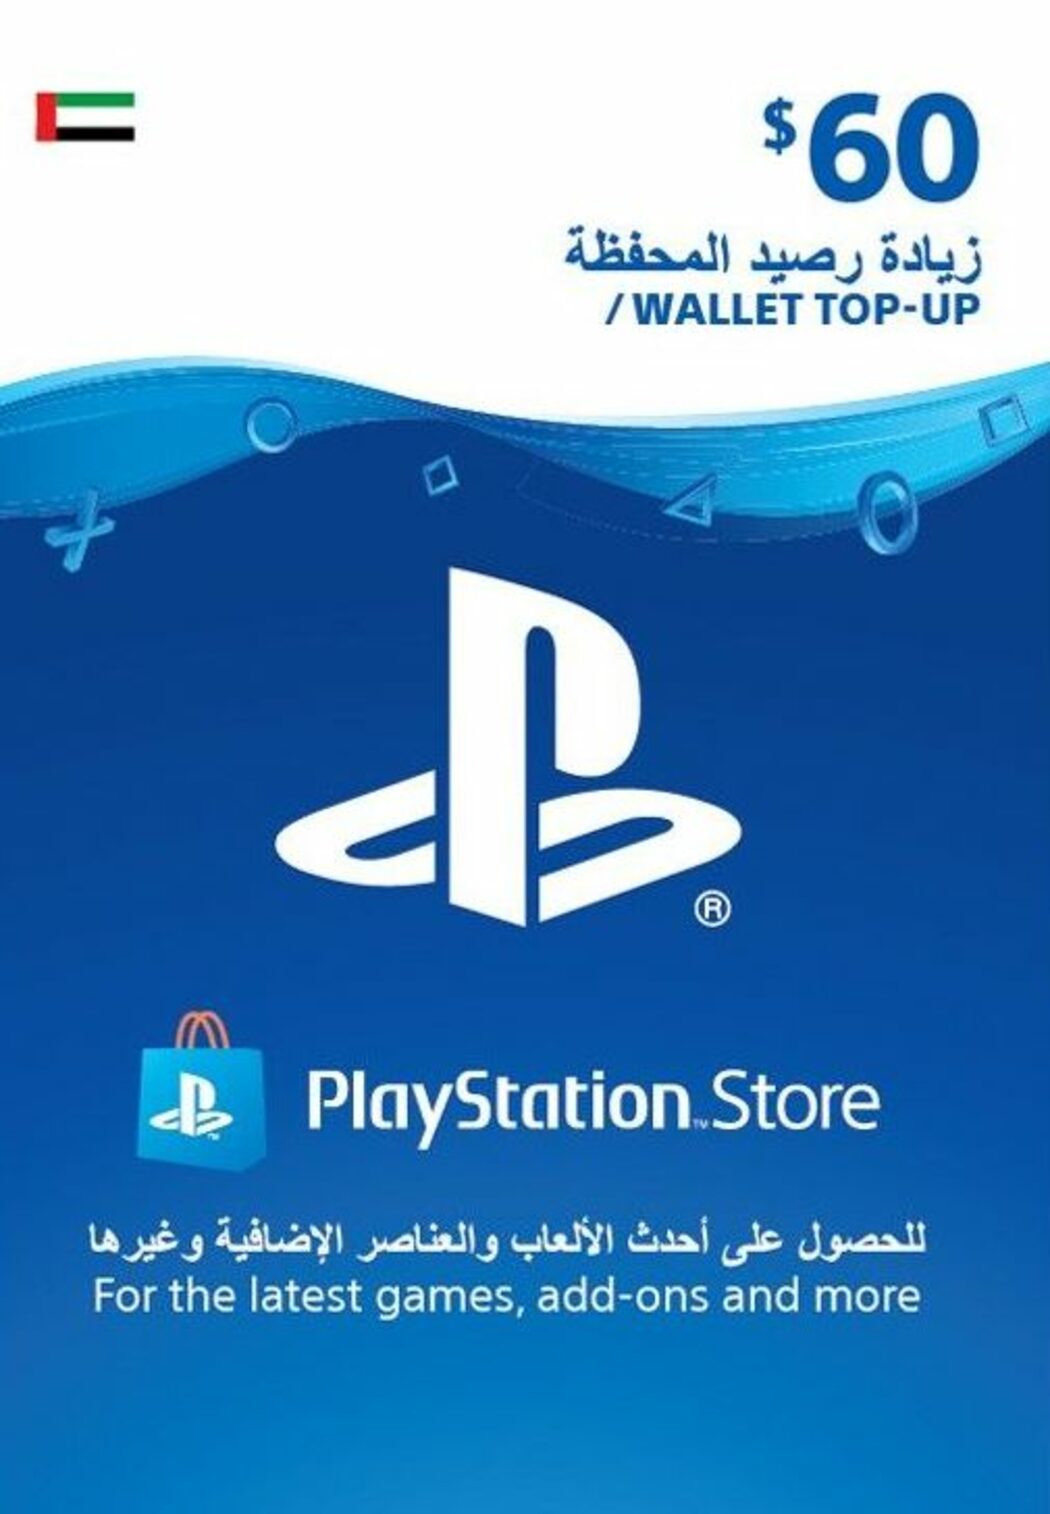 $60 ps4 gift card